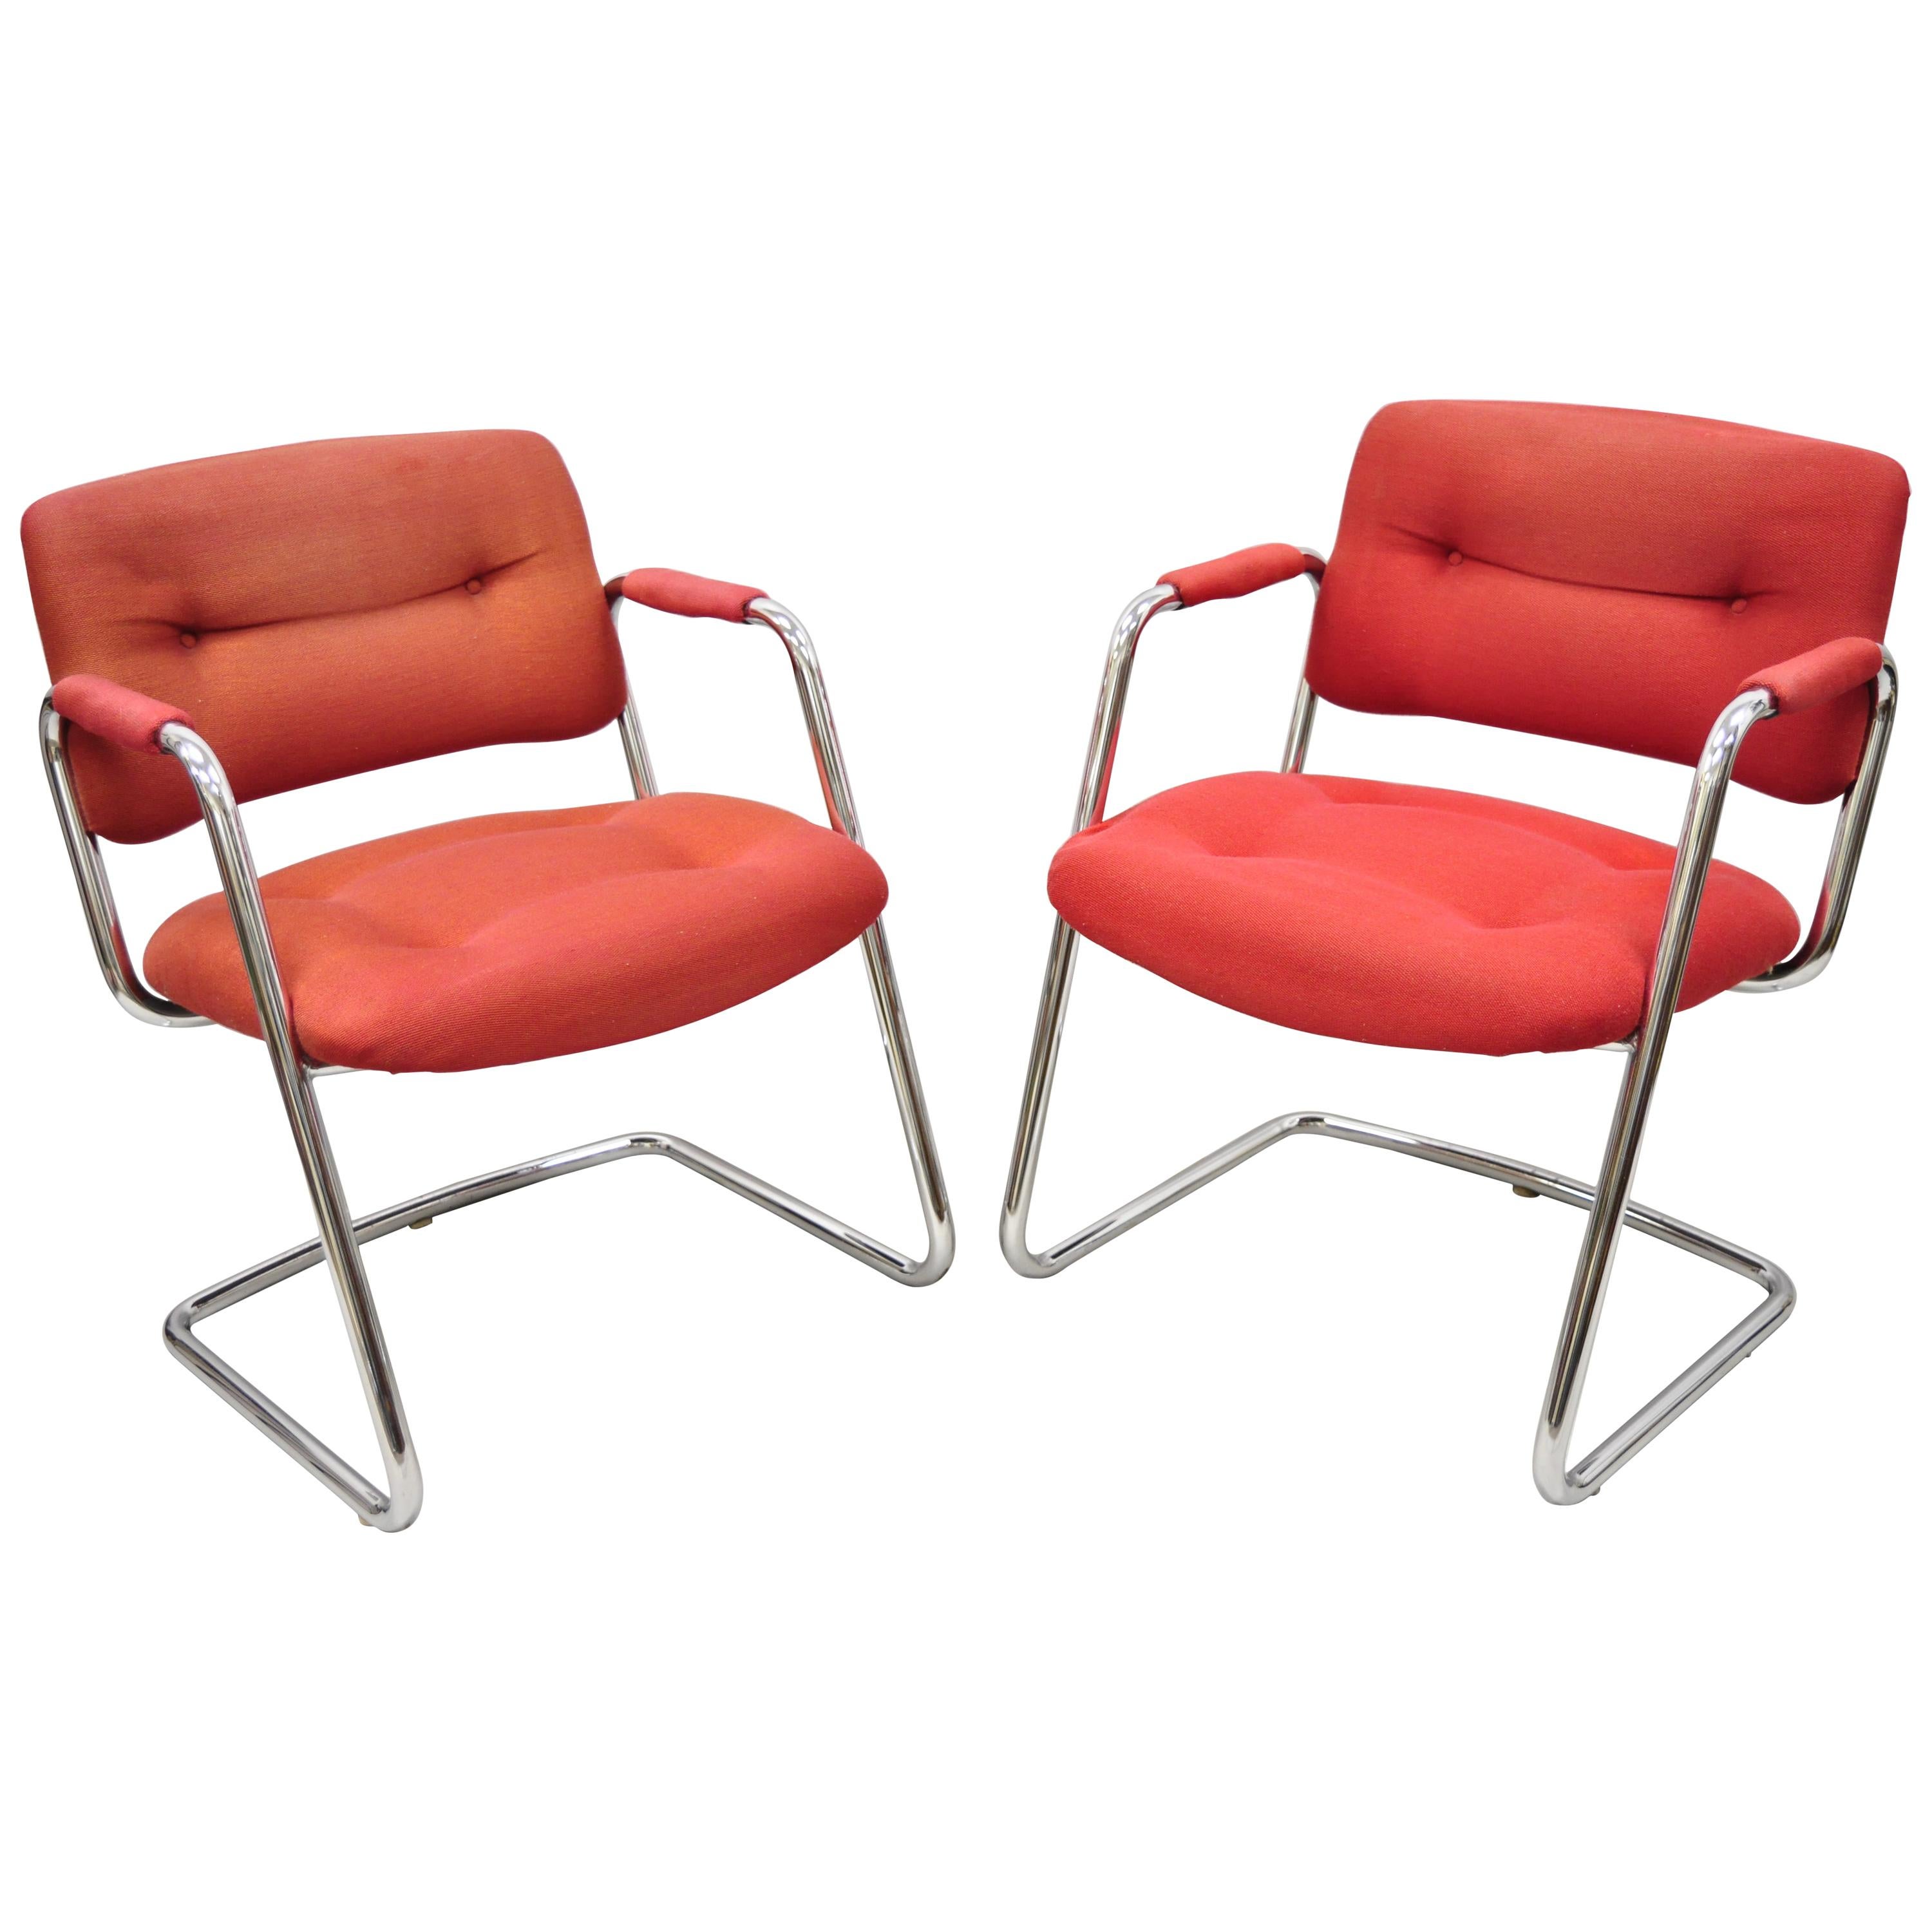 Steelcase Mid-Century Modern Tubular Chrome Red Upholstered Arm Lounge Chairs B